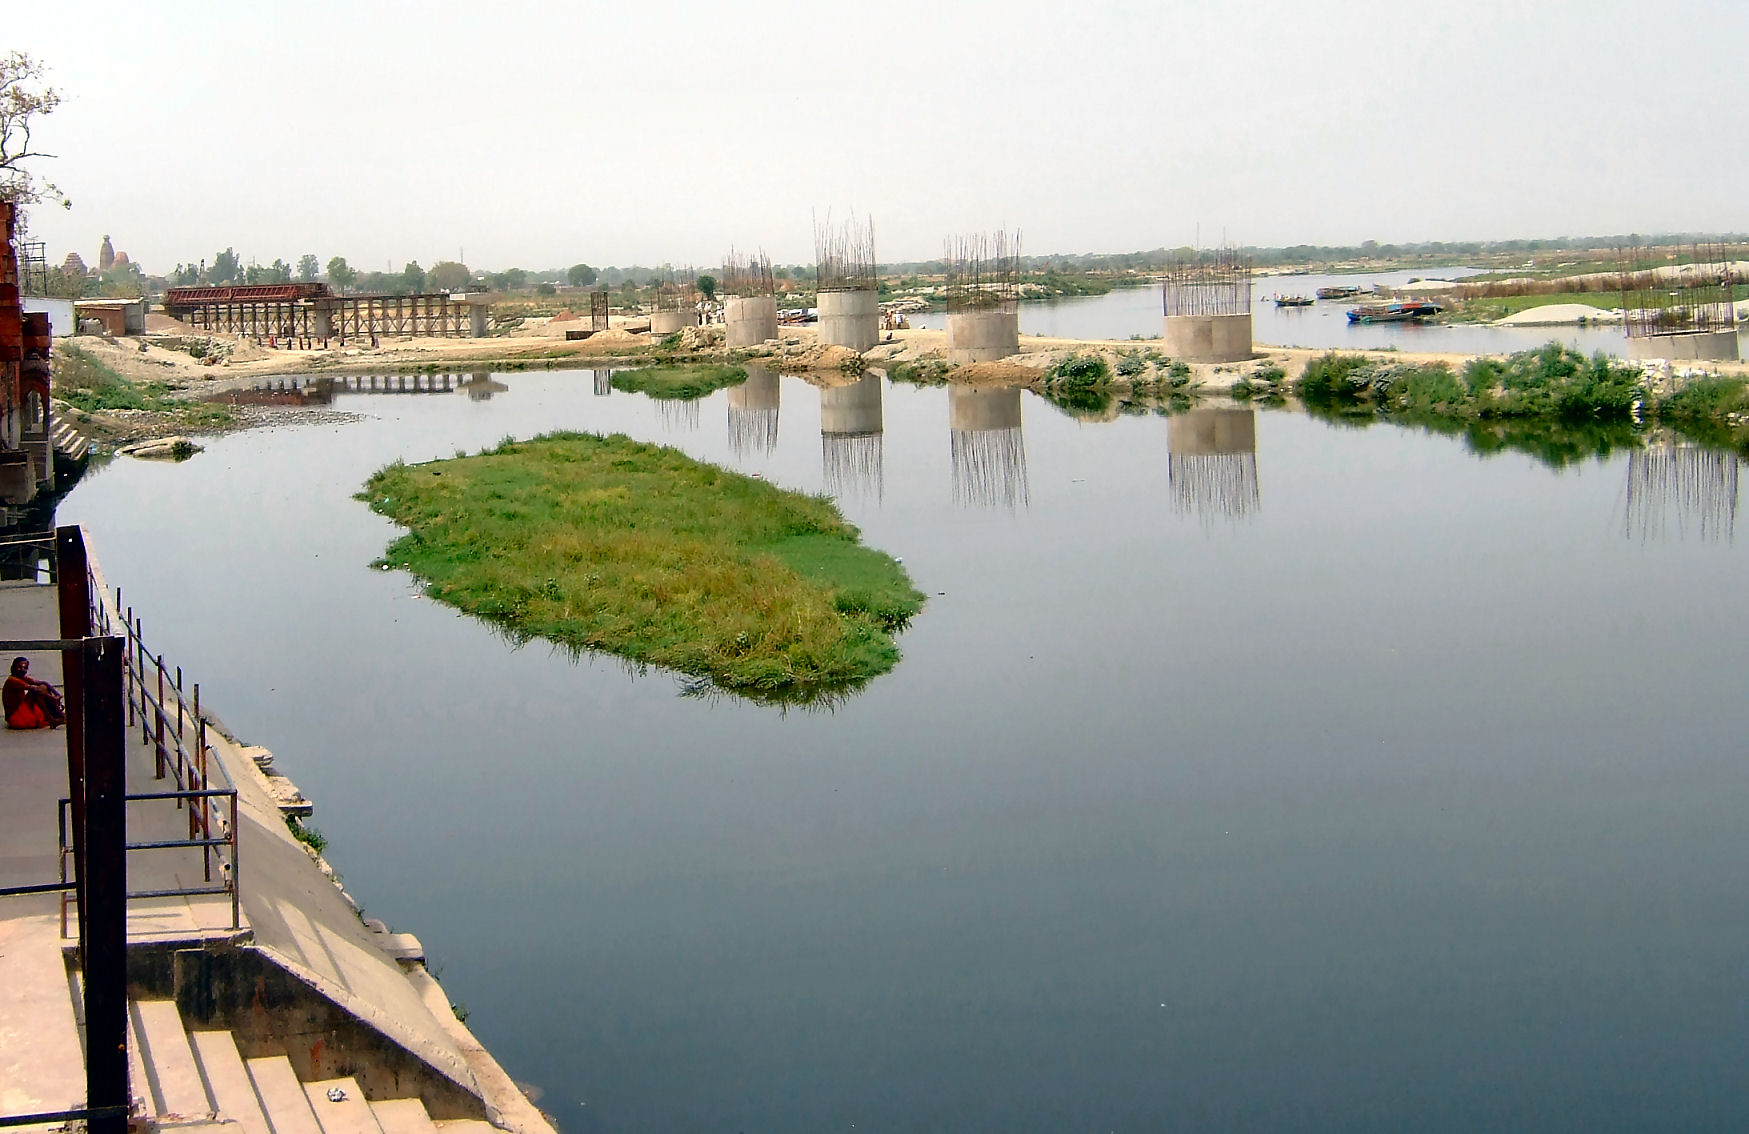 DDA’s Horticulture Department to protect 4,500 acres of land along Yamuna